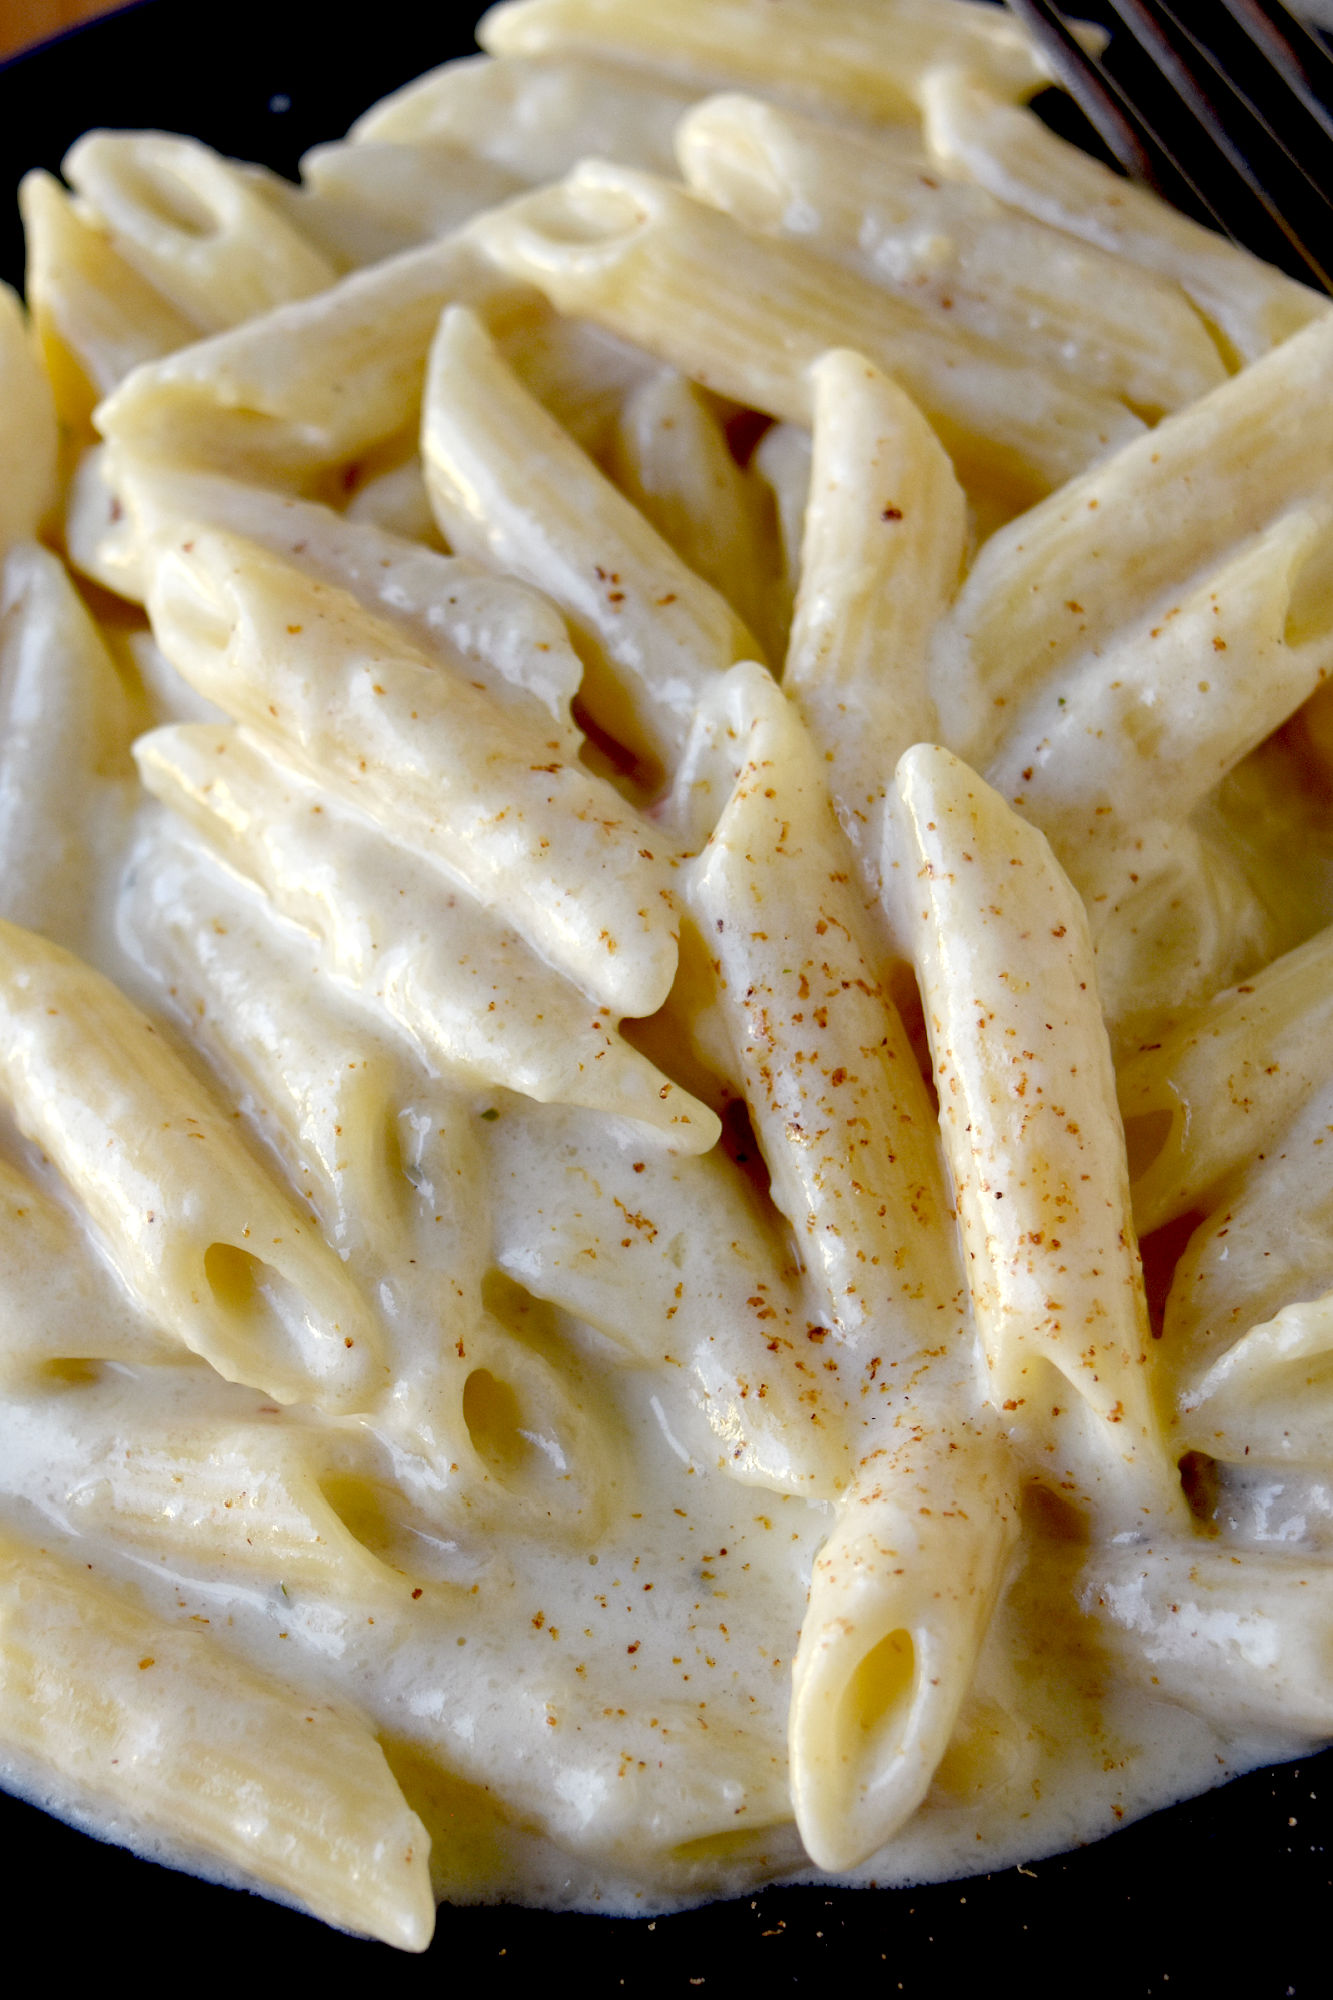 Easy Alfredo Sauce has 3 ingredients. It’s easier and simpler than you think to make a restaurant quality Alfredo sauce that is lick the plate delicious. #DairyMonth #Alfredo